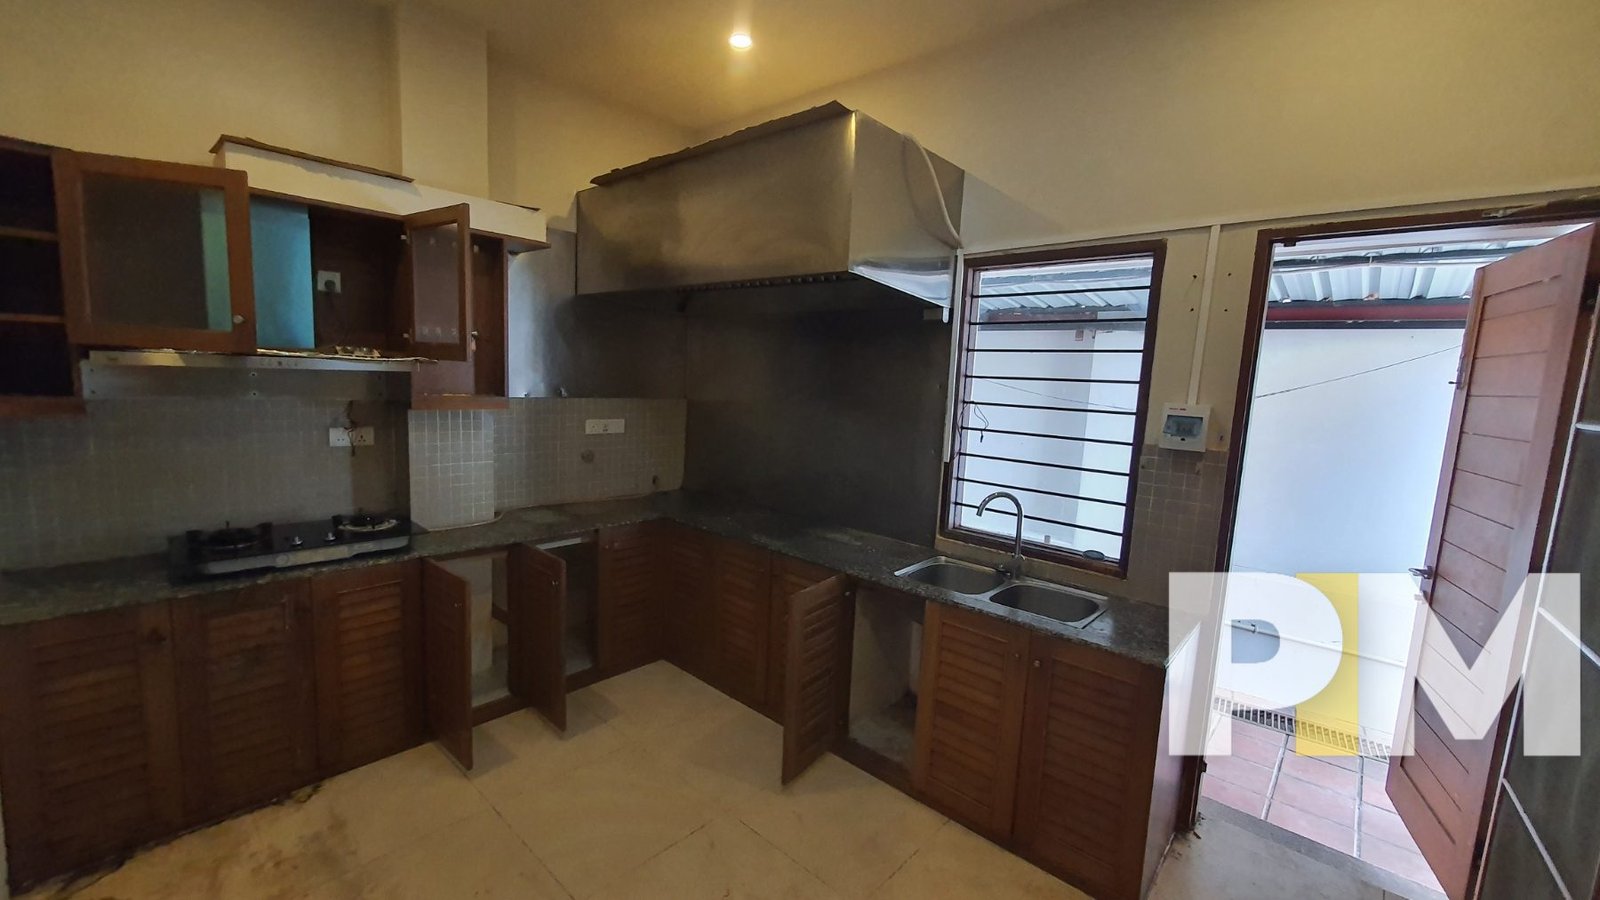 kitchen with cabinets - Myanmar house for rent